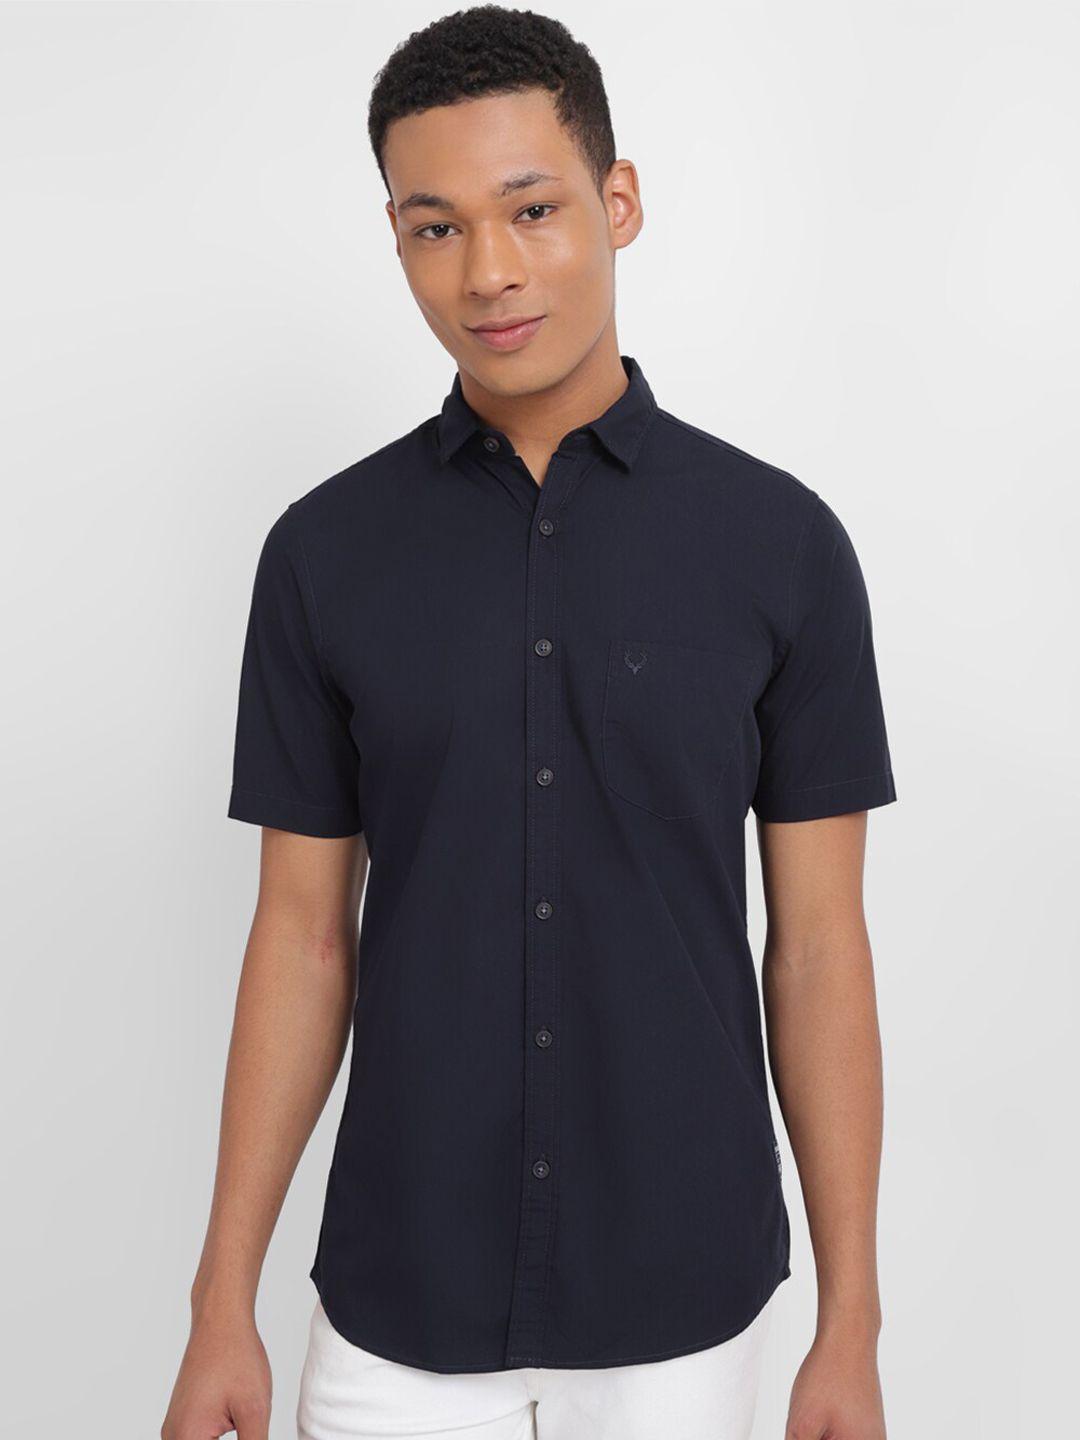 allen solly custom fit short sleeves pure cotton casual shirt